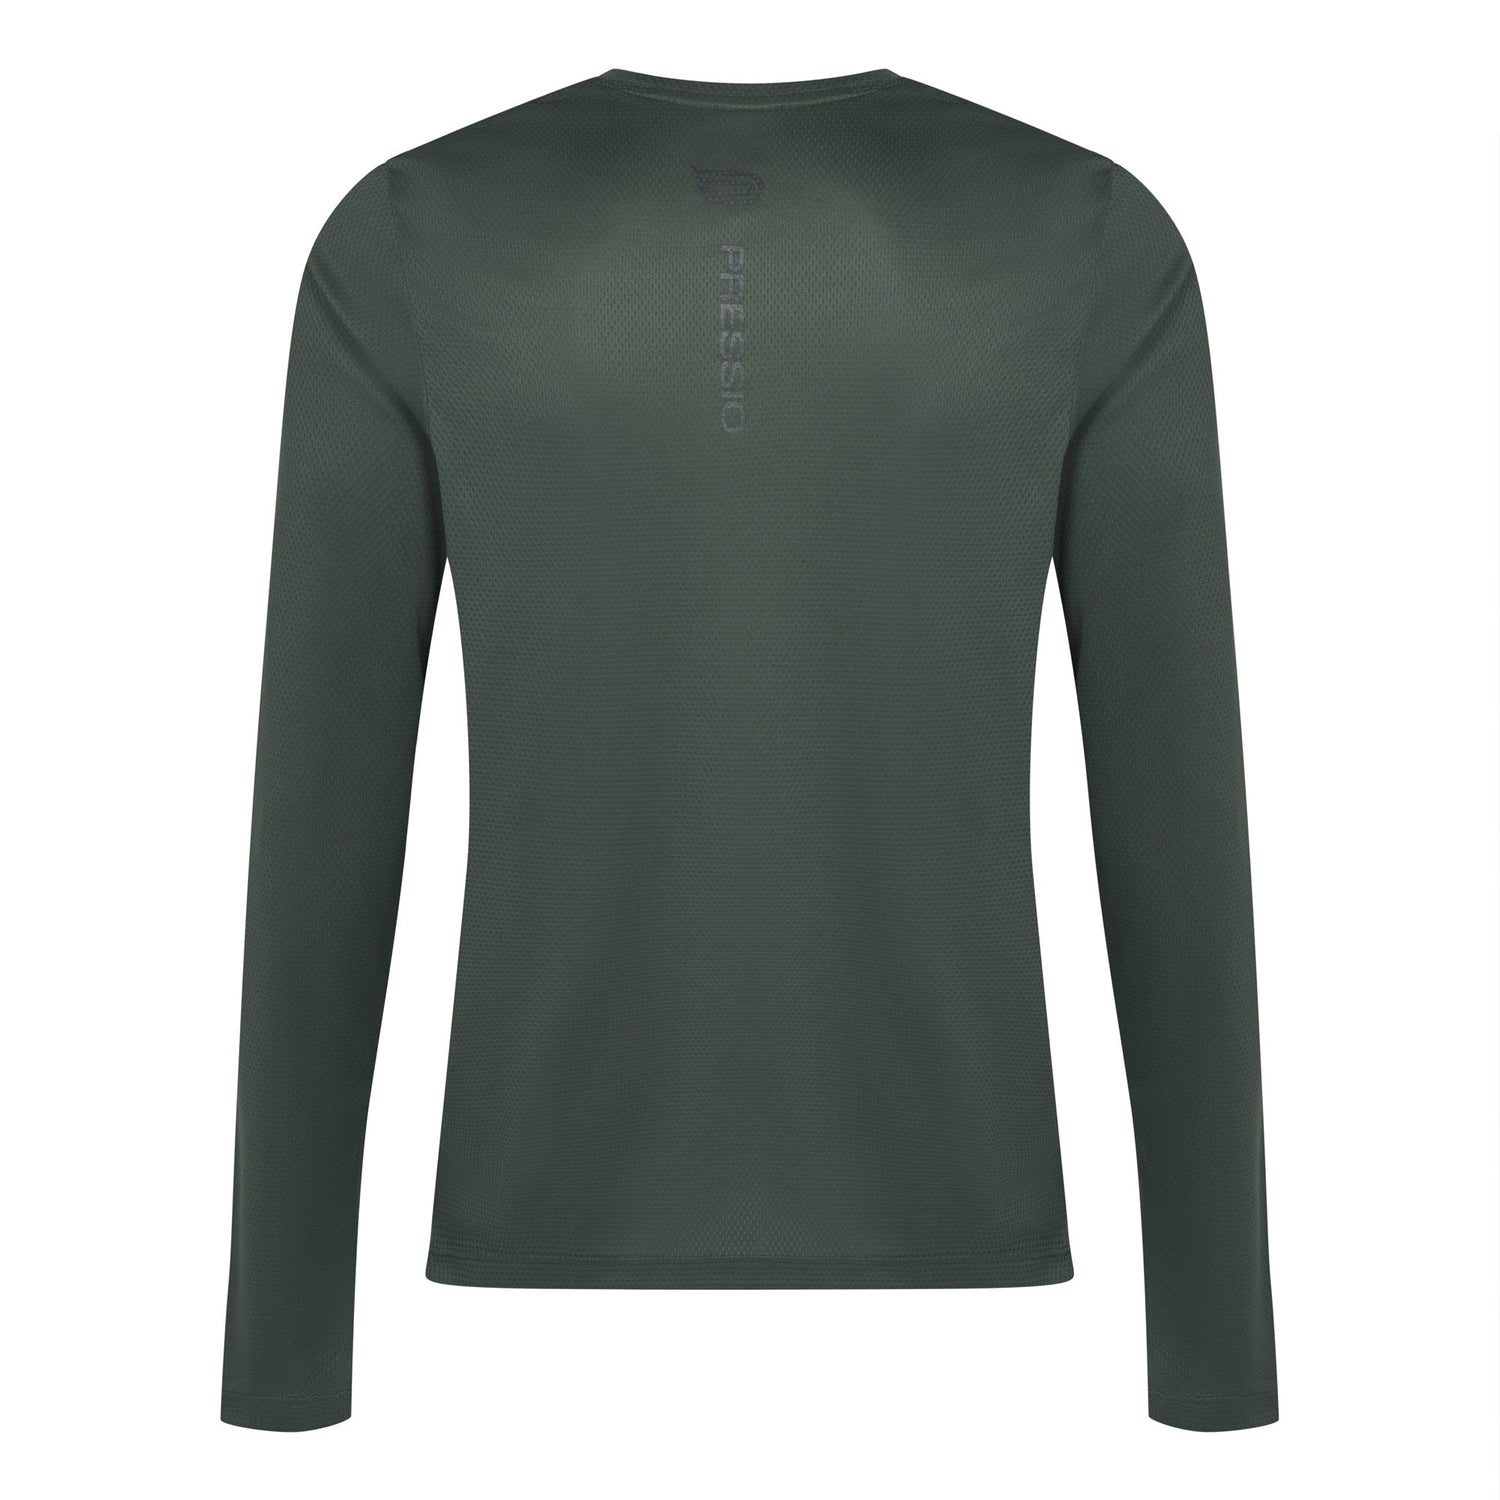 Pressio M's Hāpai Long Sleeve Top - Recycled Polyester Khaki Shirt